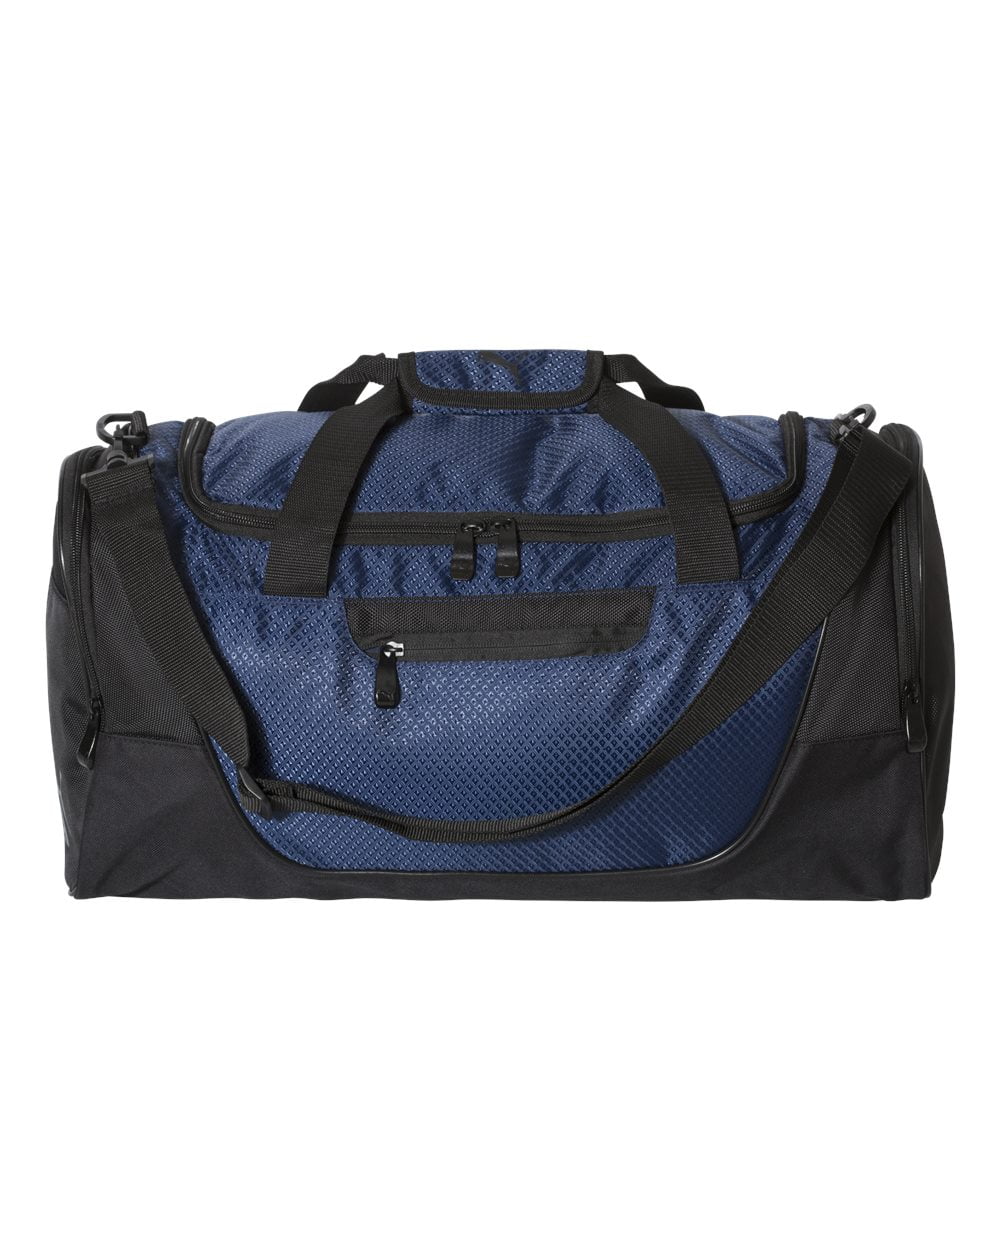 Exclusive Starter 21 Duffle Gym Bag